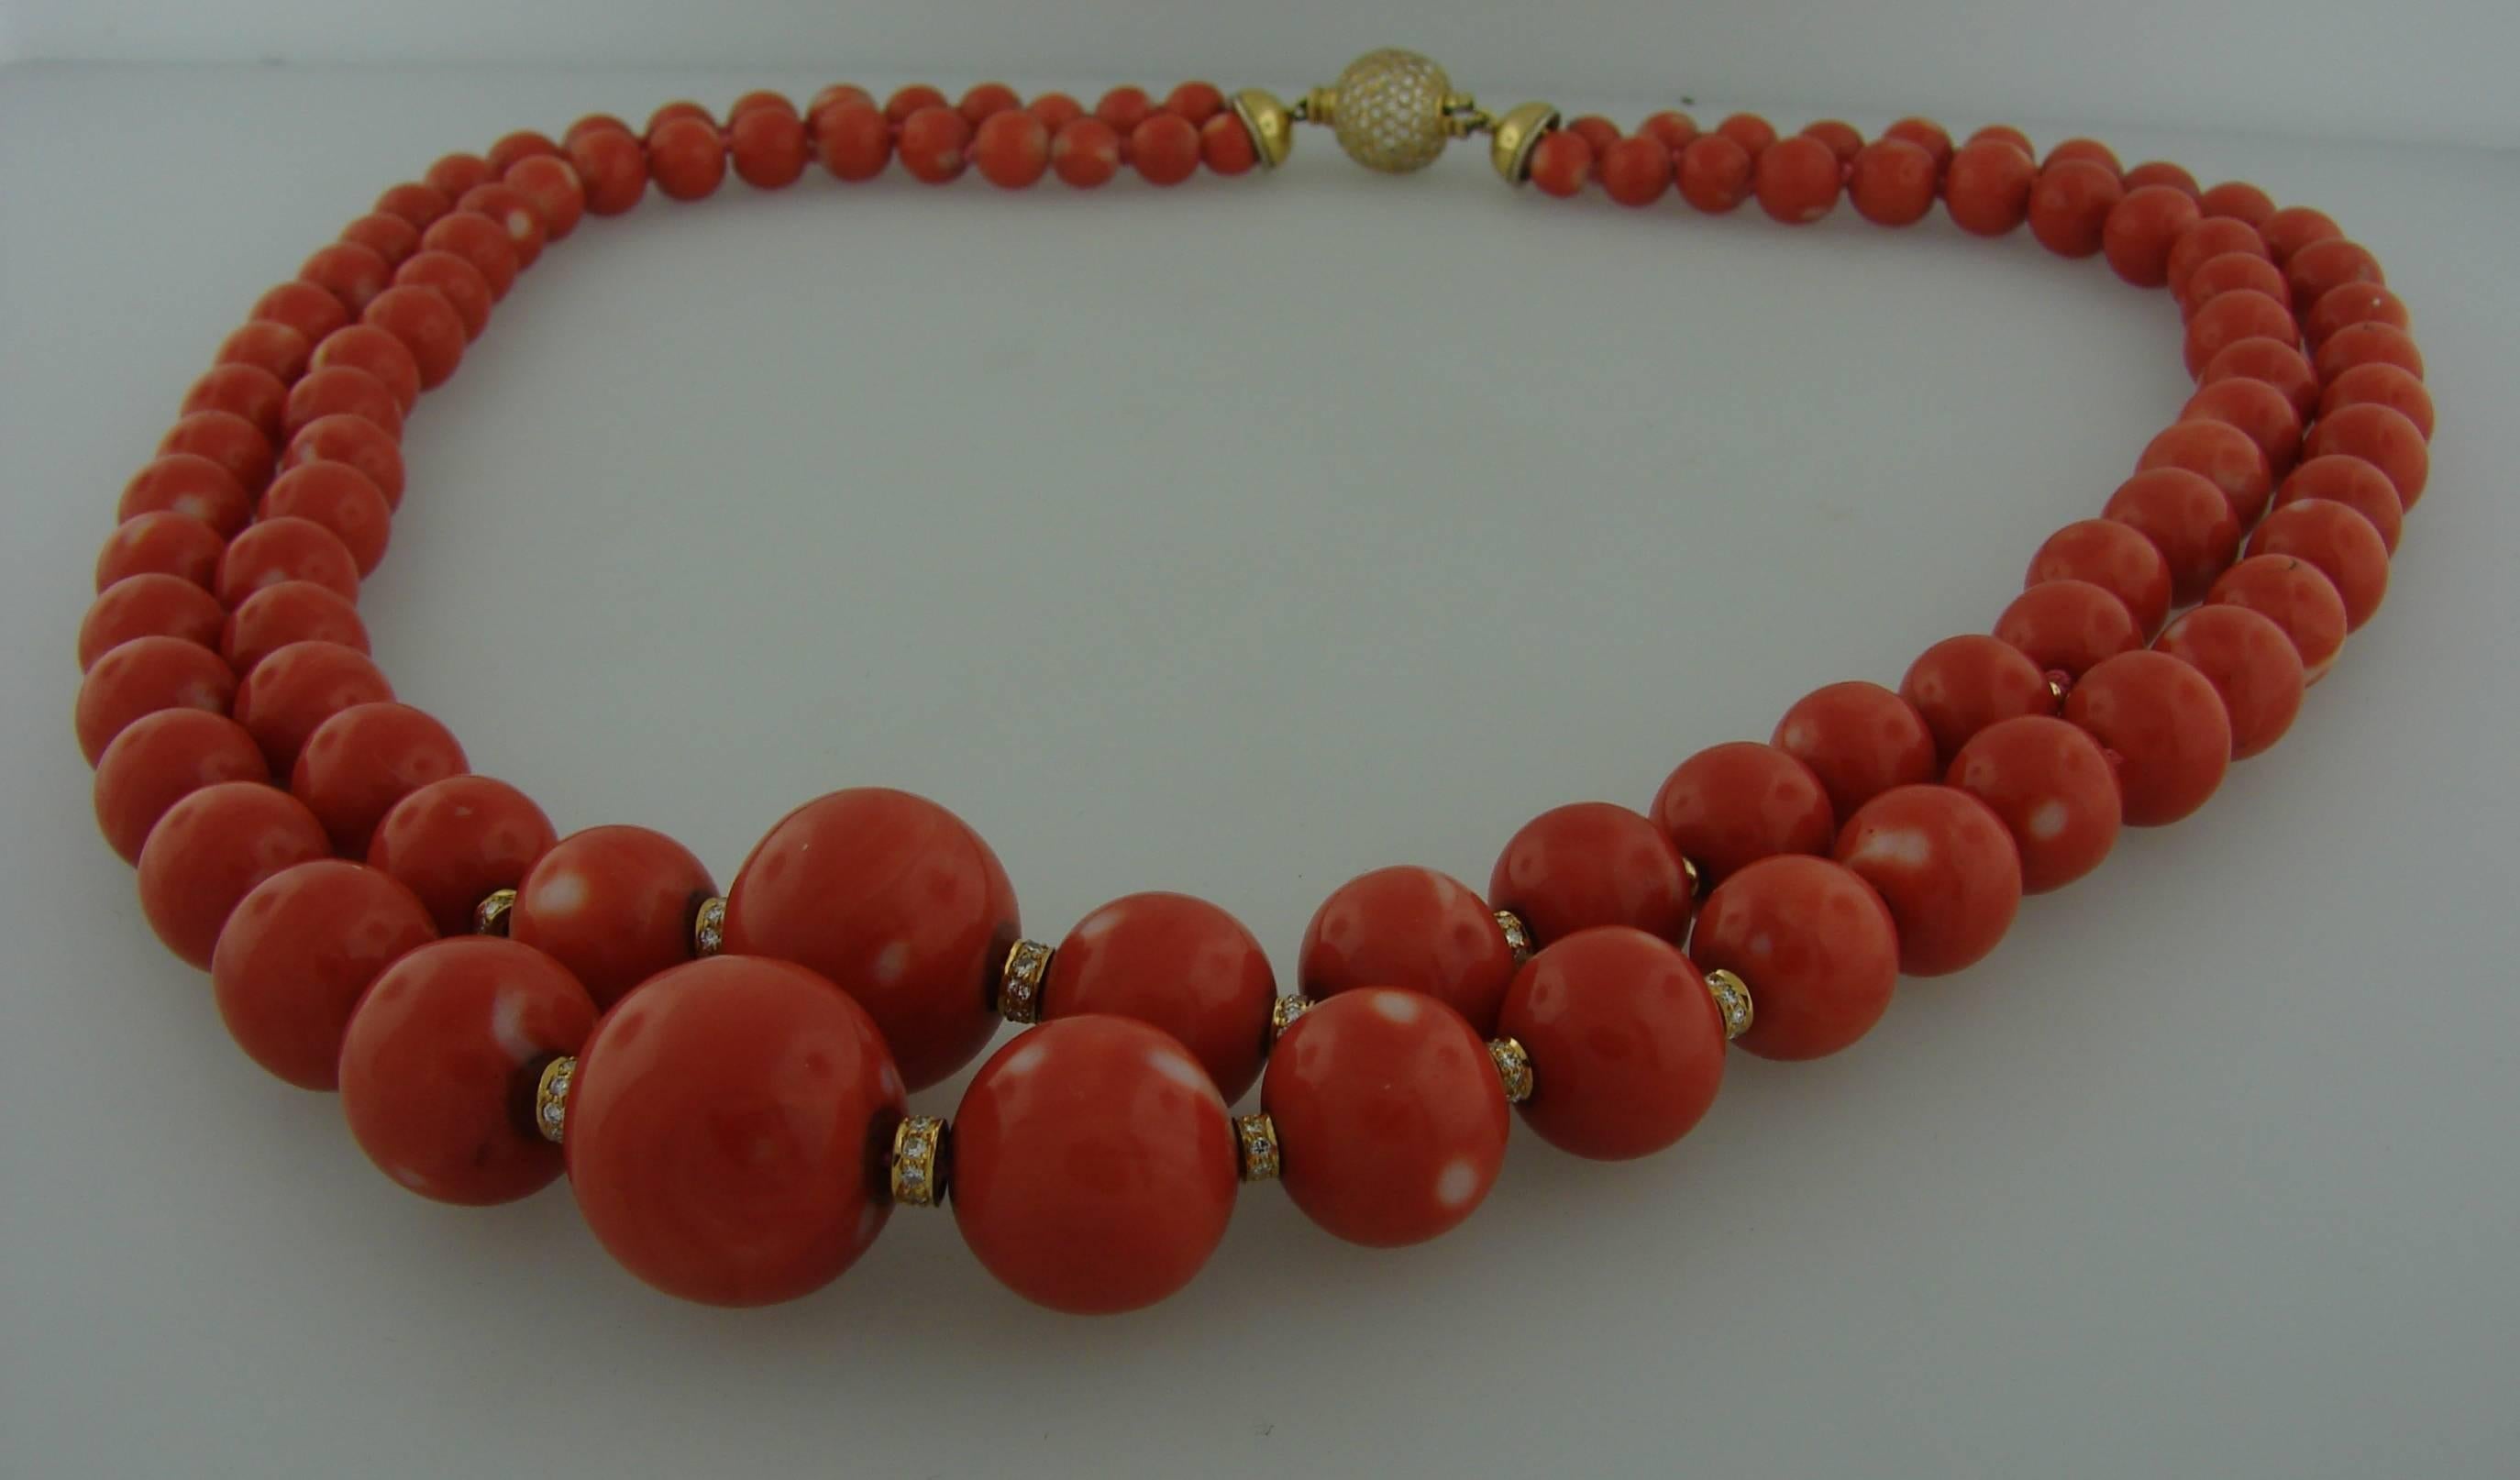 Women's c.1970s Coral Bead Necklace with Diamond & Yellow Gold Clasp by SALAVETTI